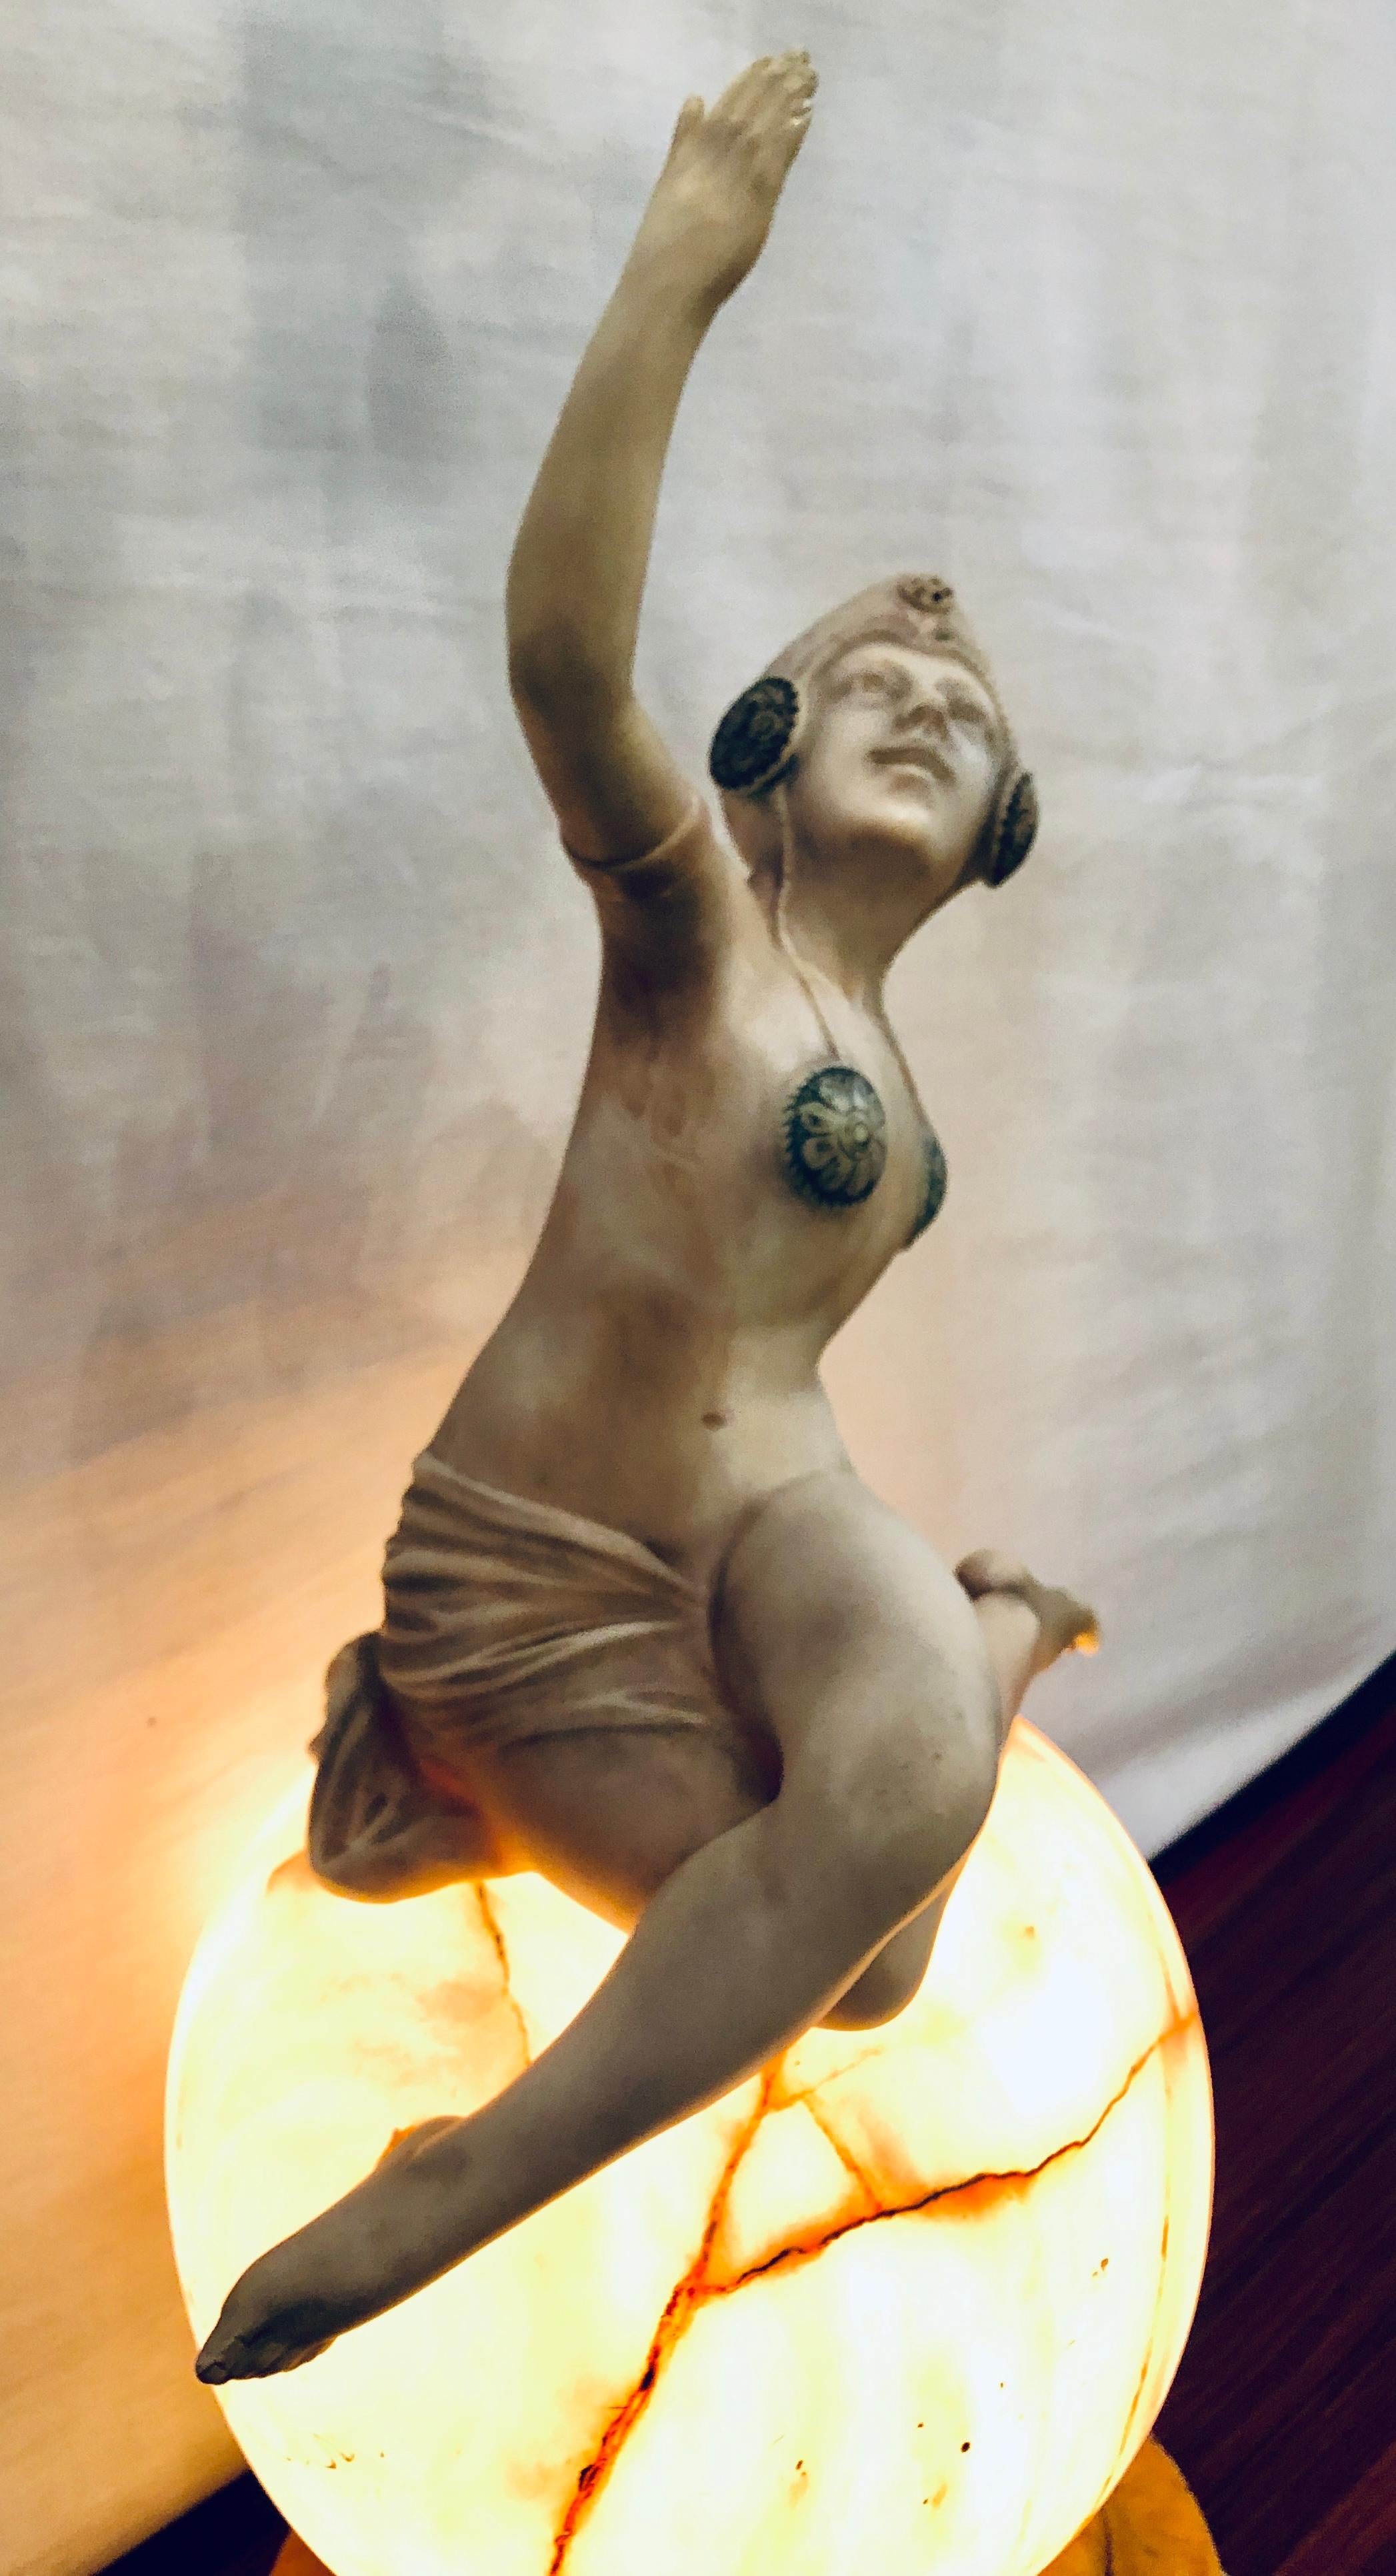 An Art Deco alabaster lamp depicting a dancing can-can girl on top of the world. This lamp is UL listed to take one light bulb. The globe having been repaired however, it may also be the intended design.